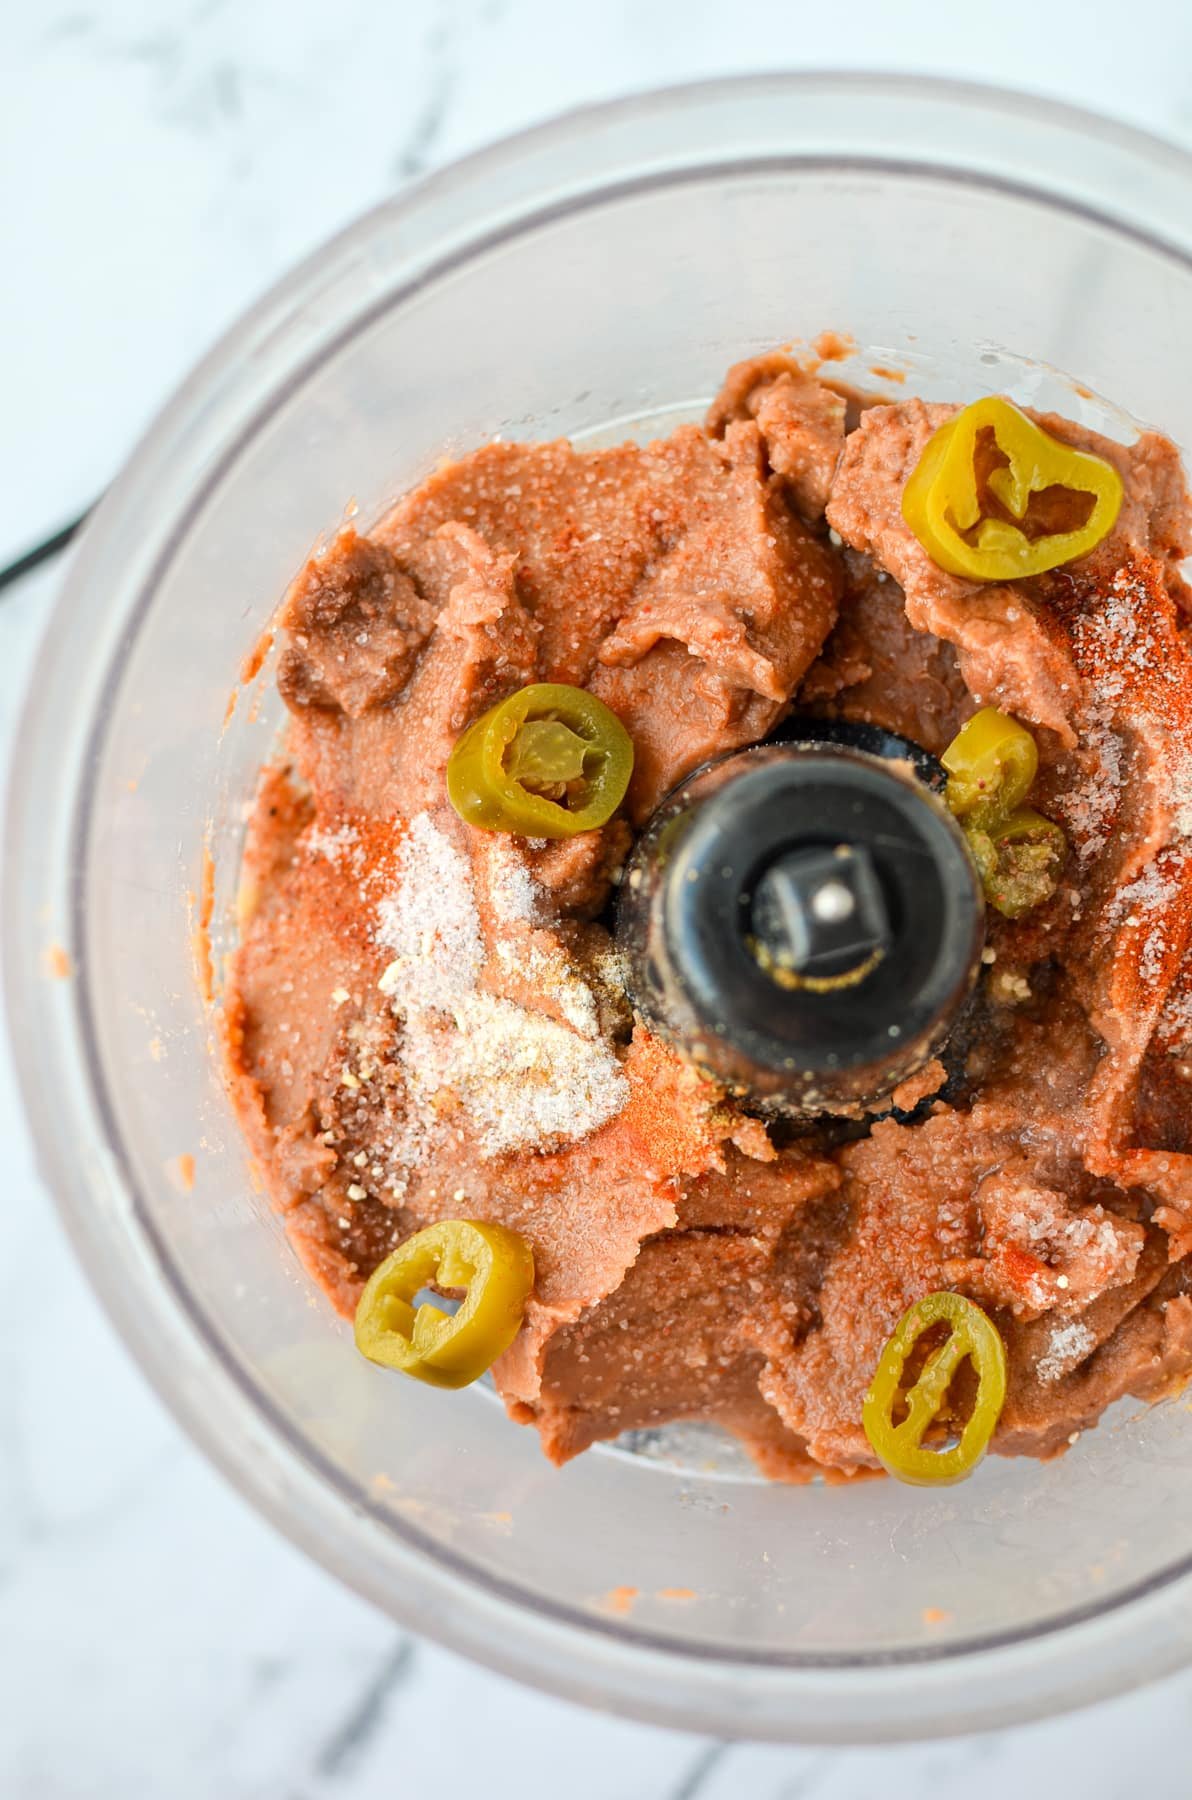 A food processor with refried beans, jalapeno slices, and seasonings.